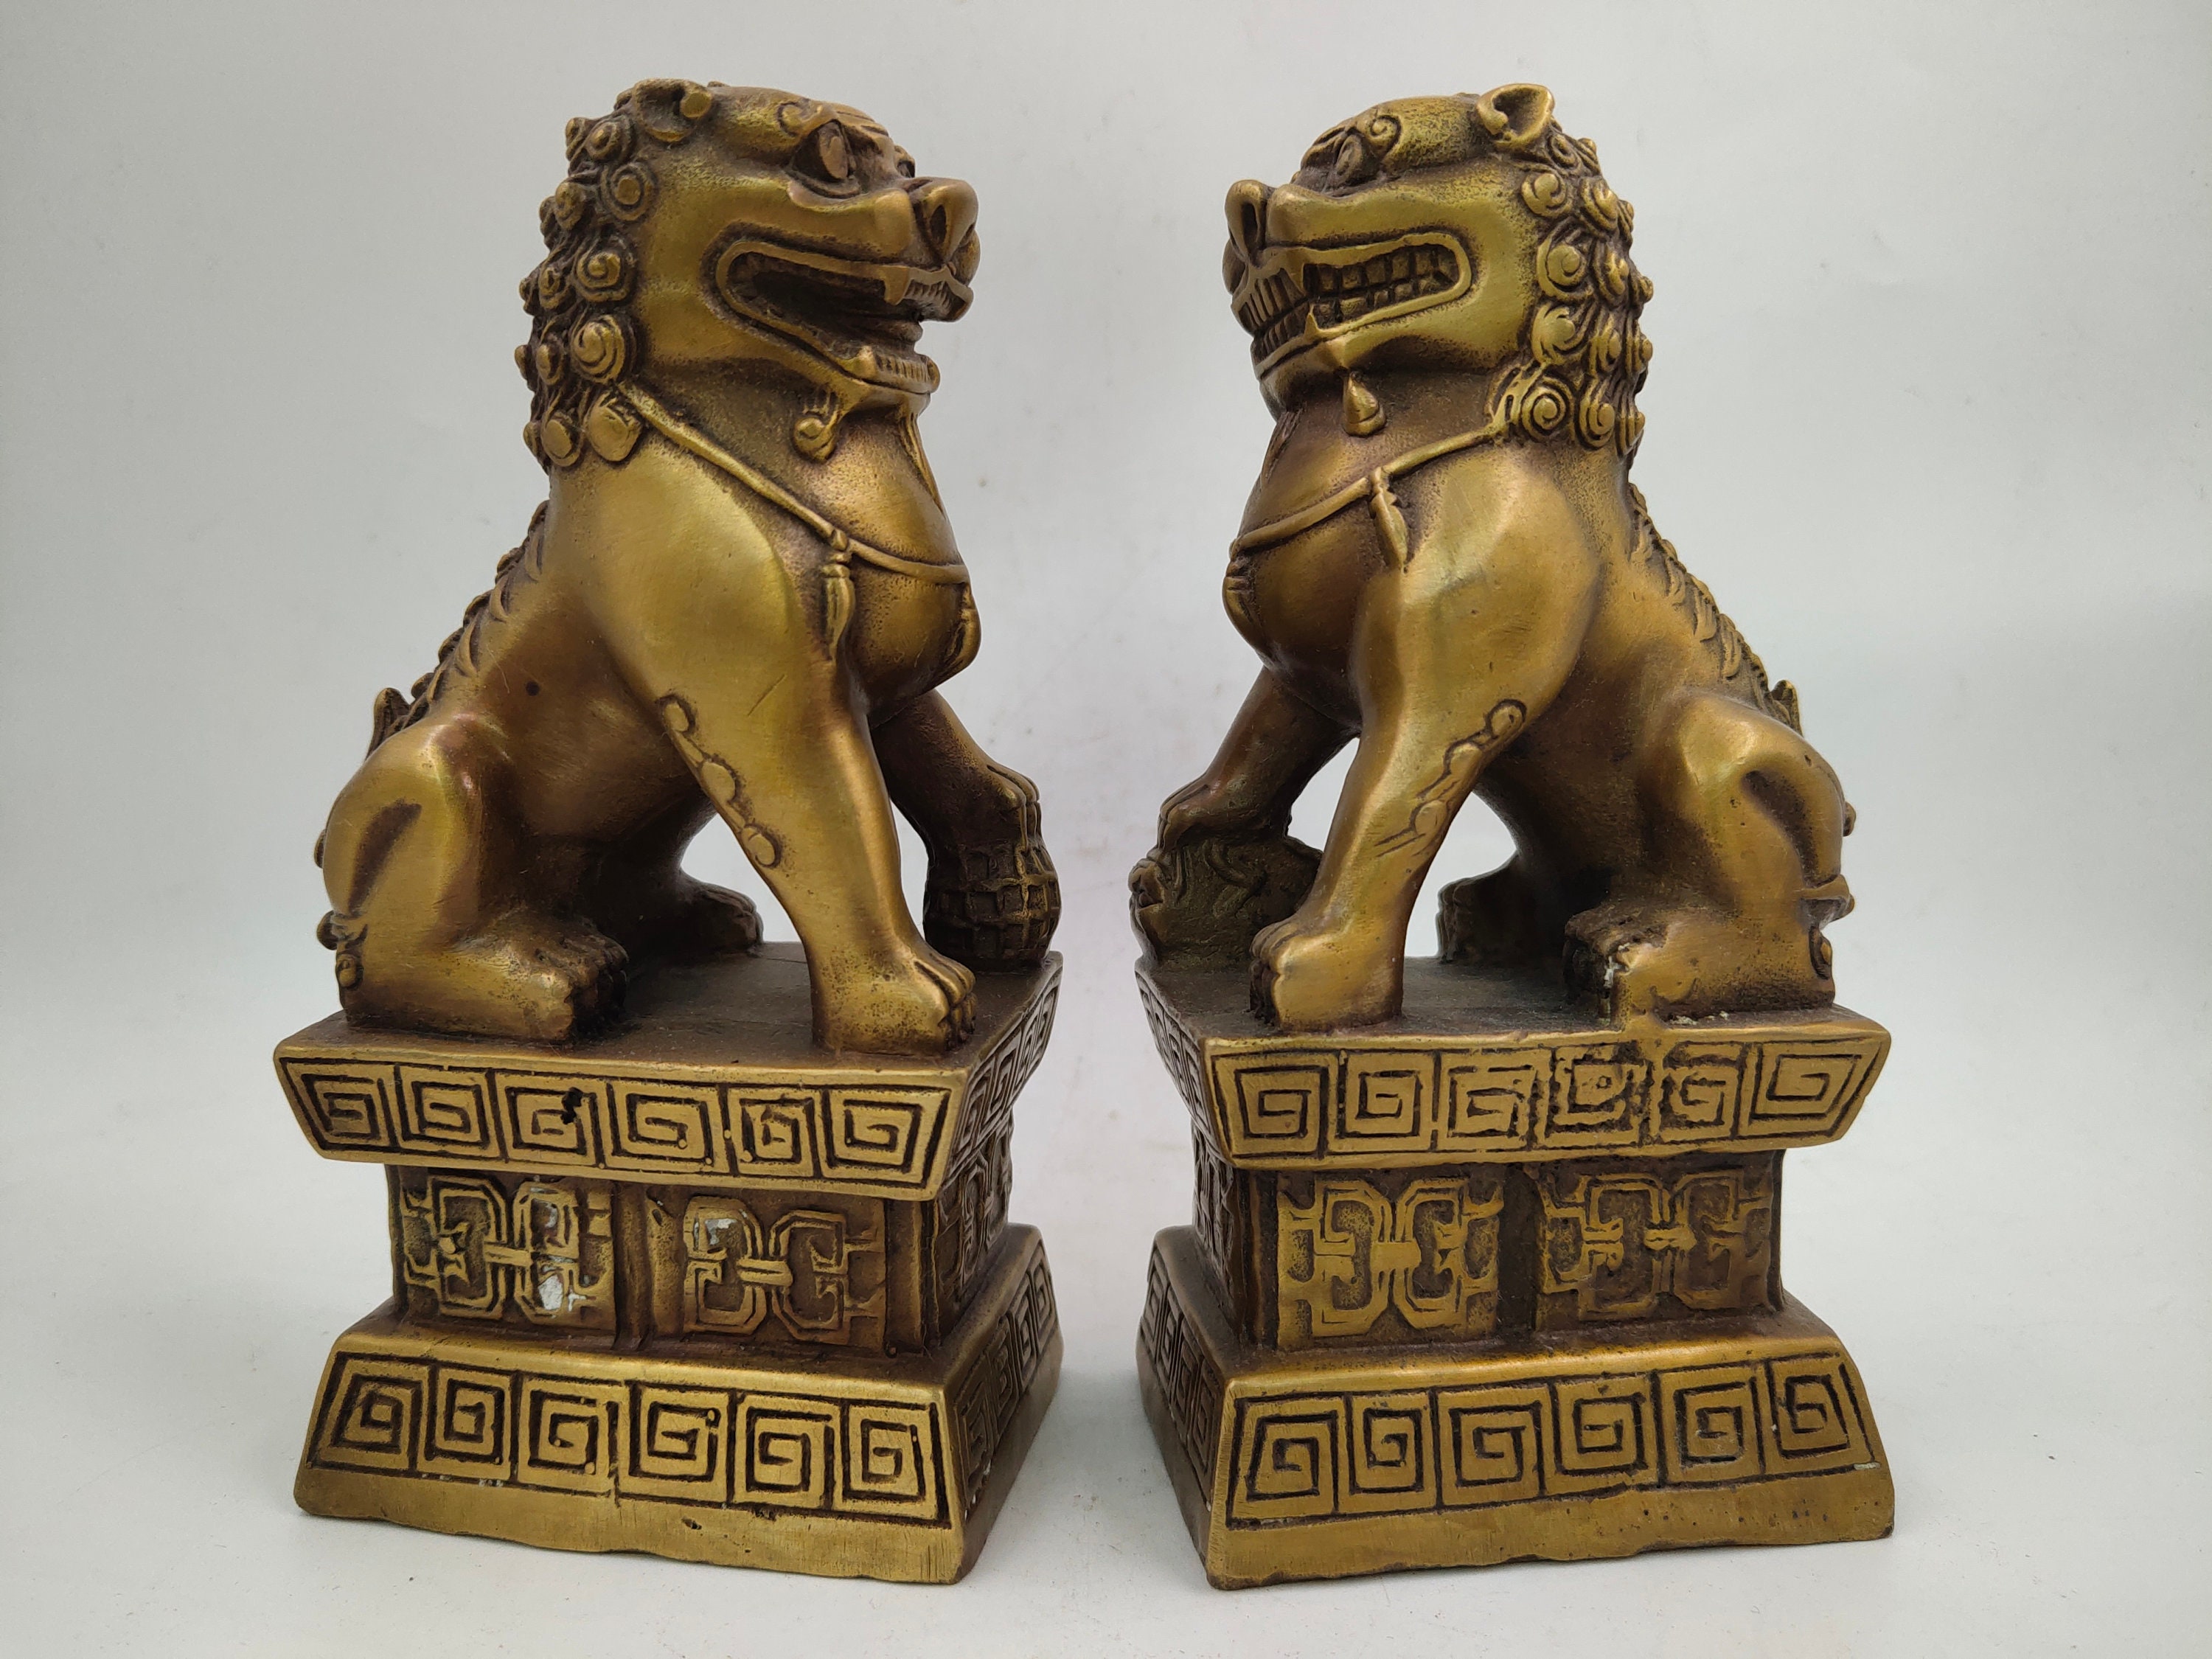 Exquisite Chinese Green jade Carving Fengshui Foo Fu Dog Guardion Door Lion Pair 